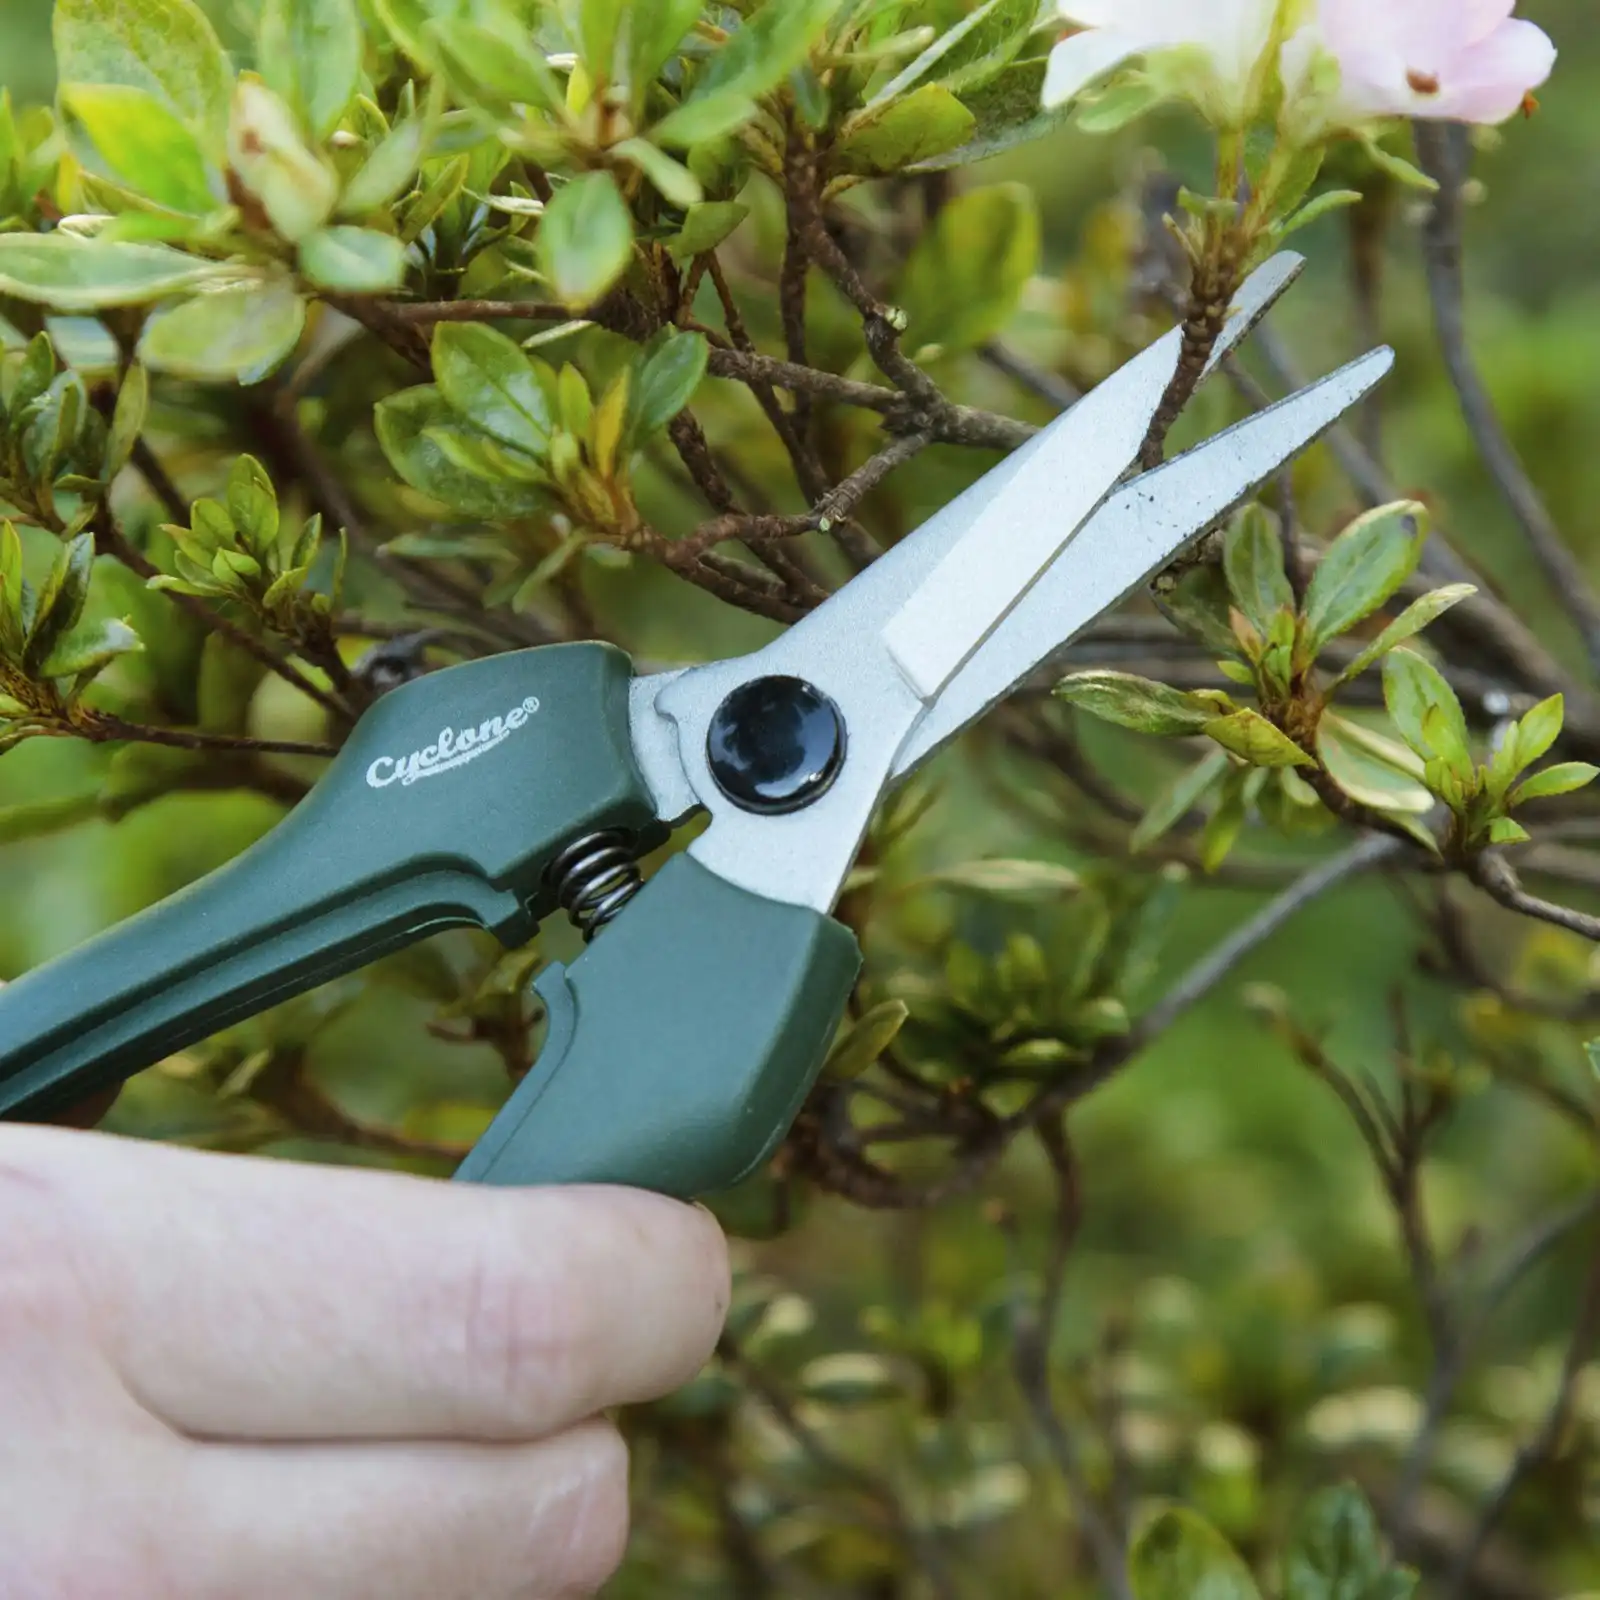 2x Cyclone Snips Floral Plant/Flowers Cutting/Gardening/Pruning Maintenance